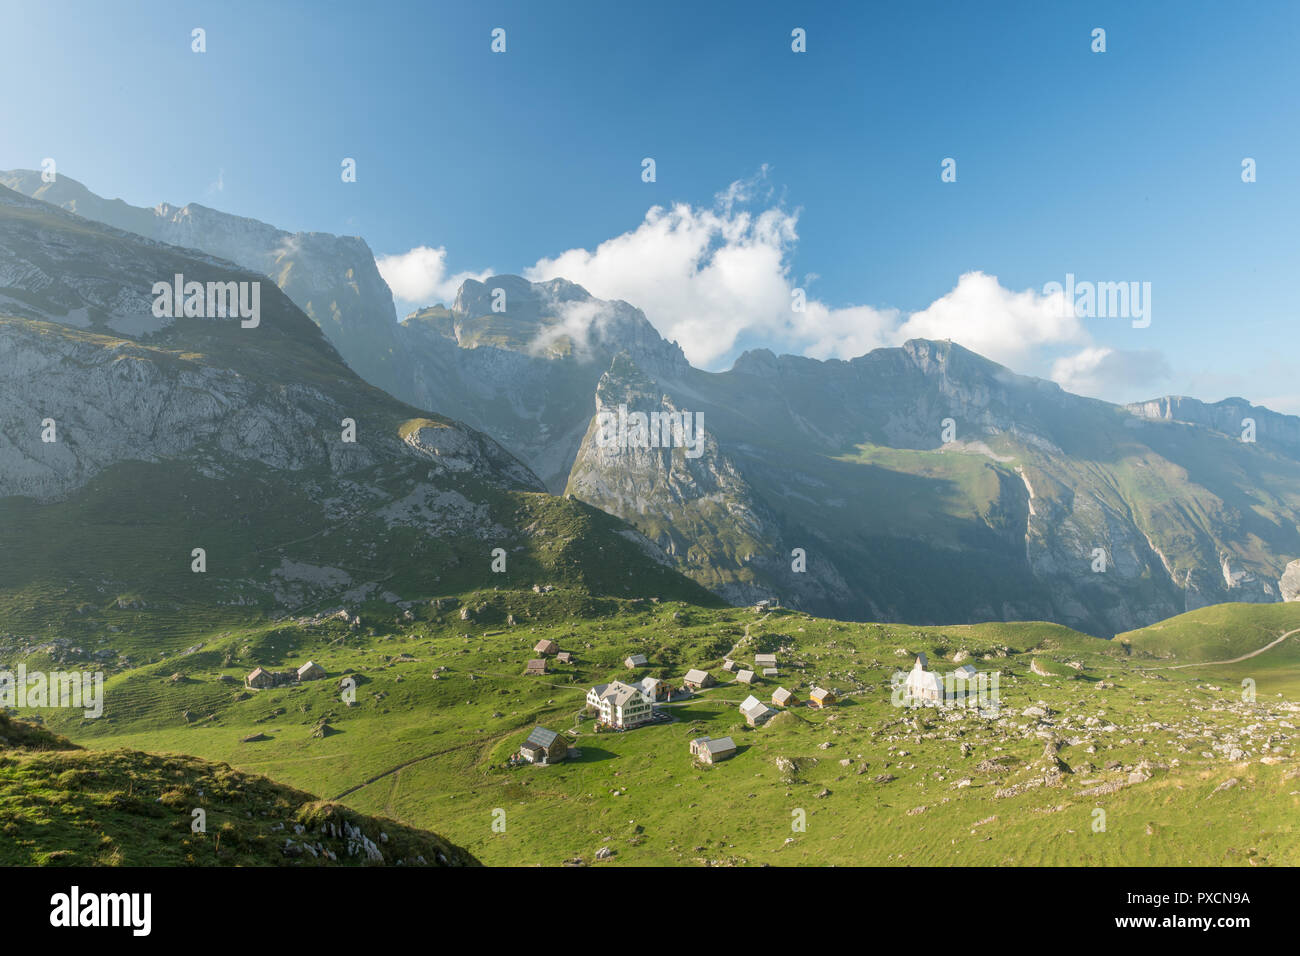 A small village in the Swiss Alps. Meglisalp, Canton Appenzell. Stock Photo